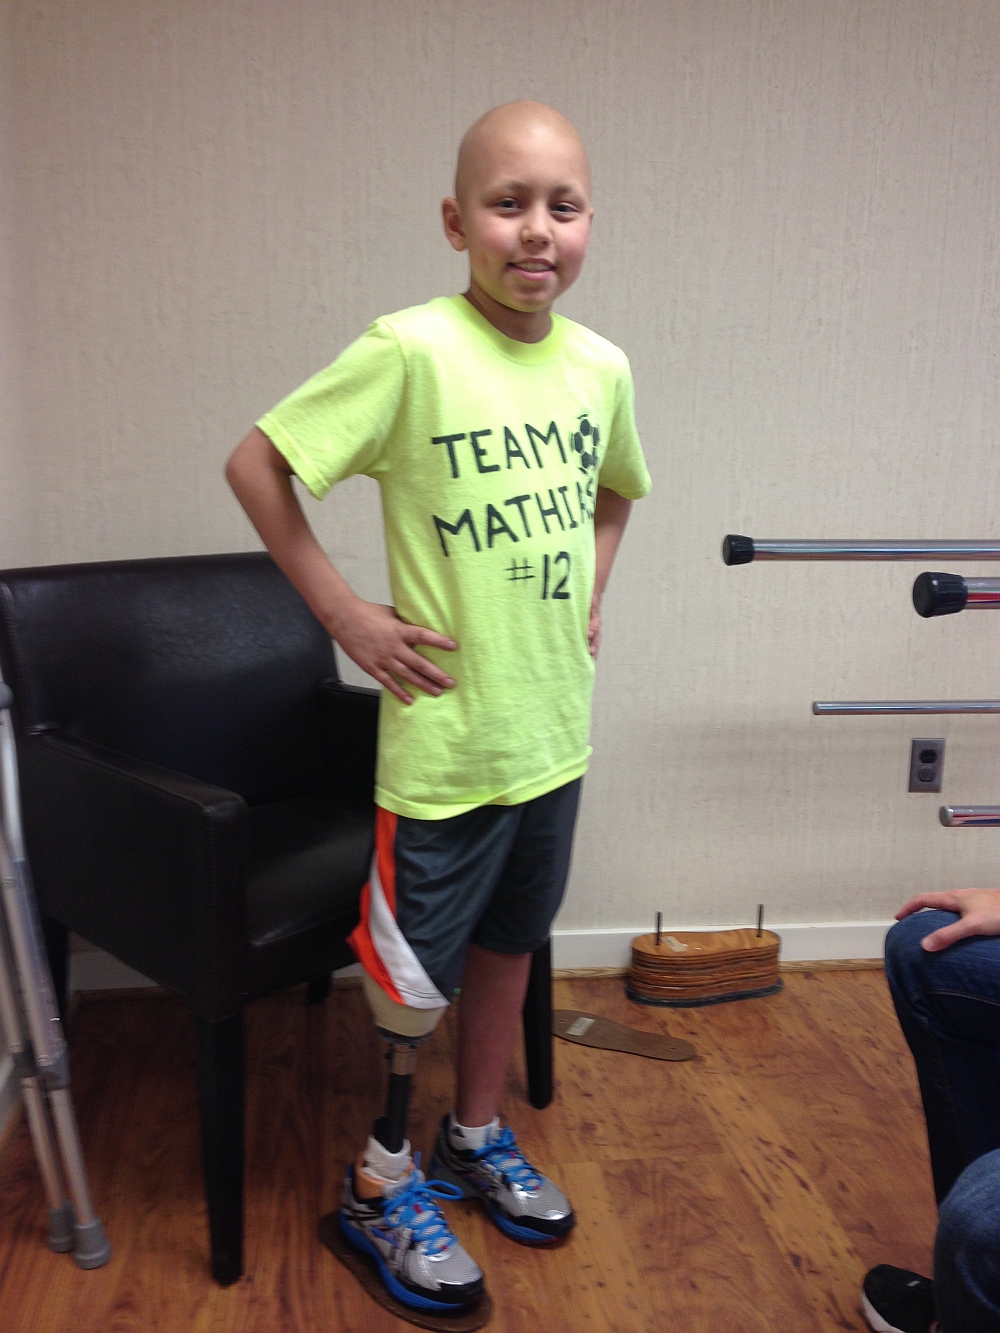 Mathias standing on his prosthetic leg for the first time without assistance